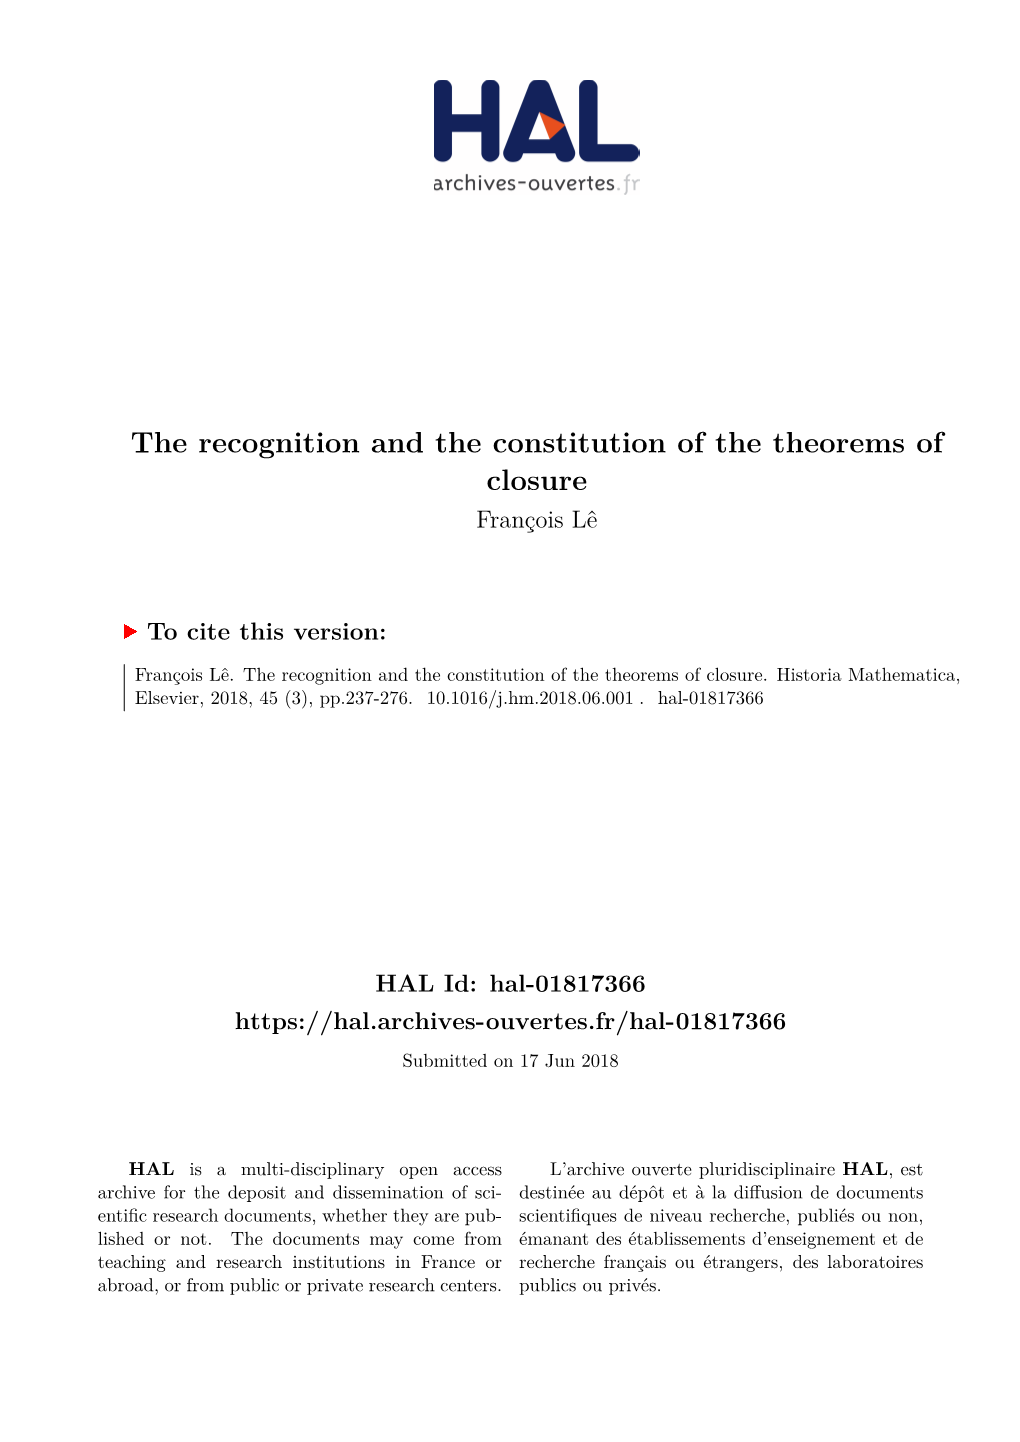 The Recognition and the Constitution of the Theorems of Closure François Lê